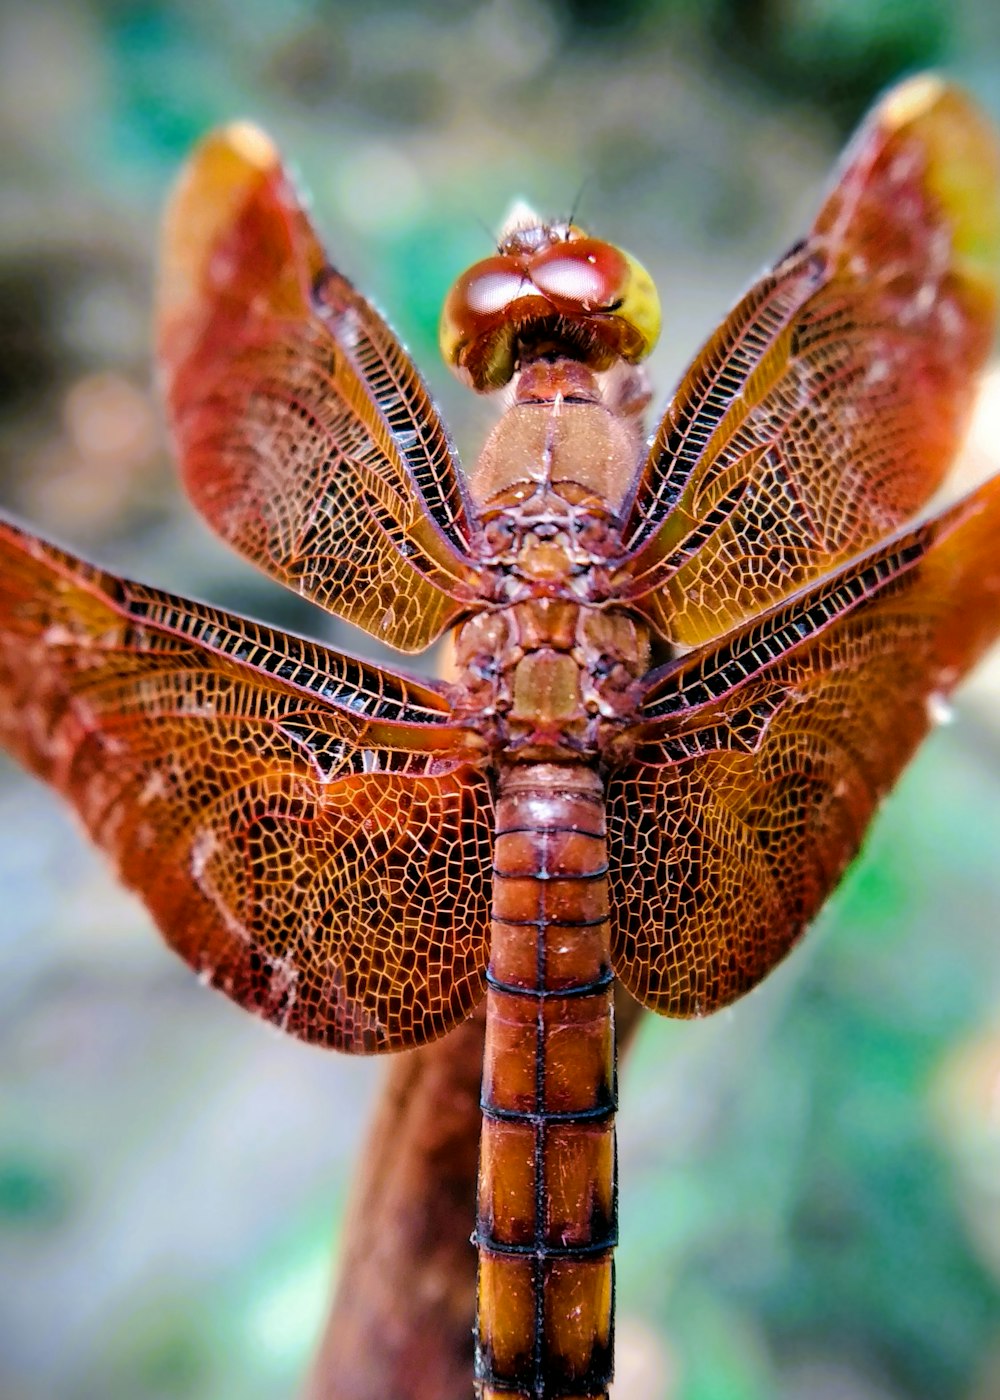 a close up of a dragonfly on a branch